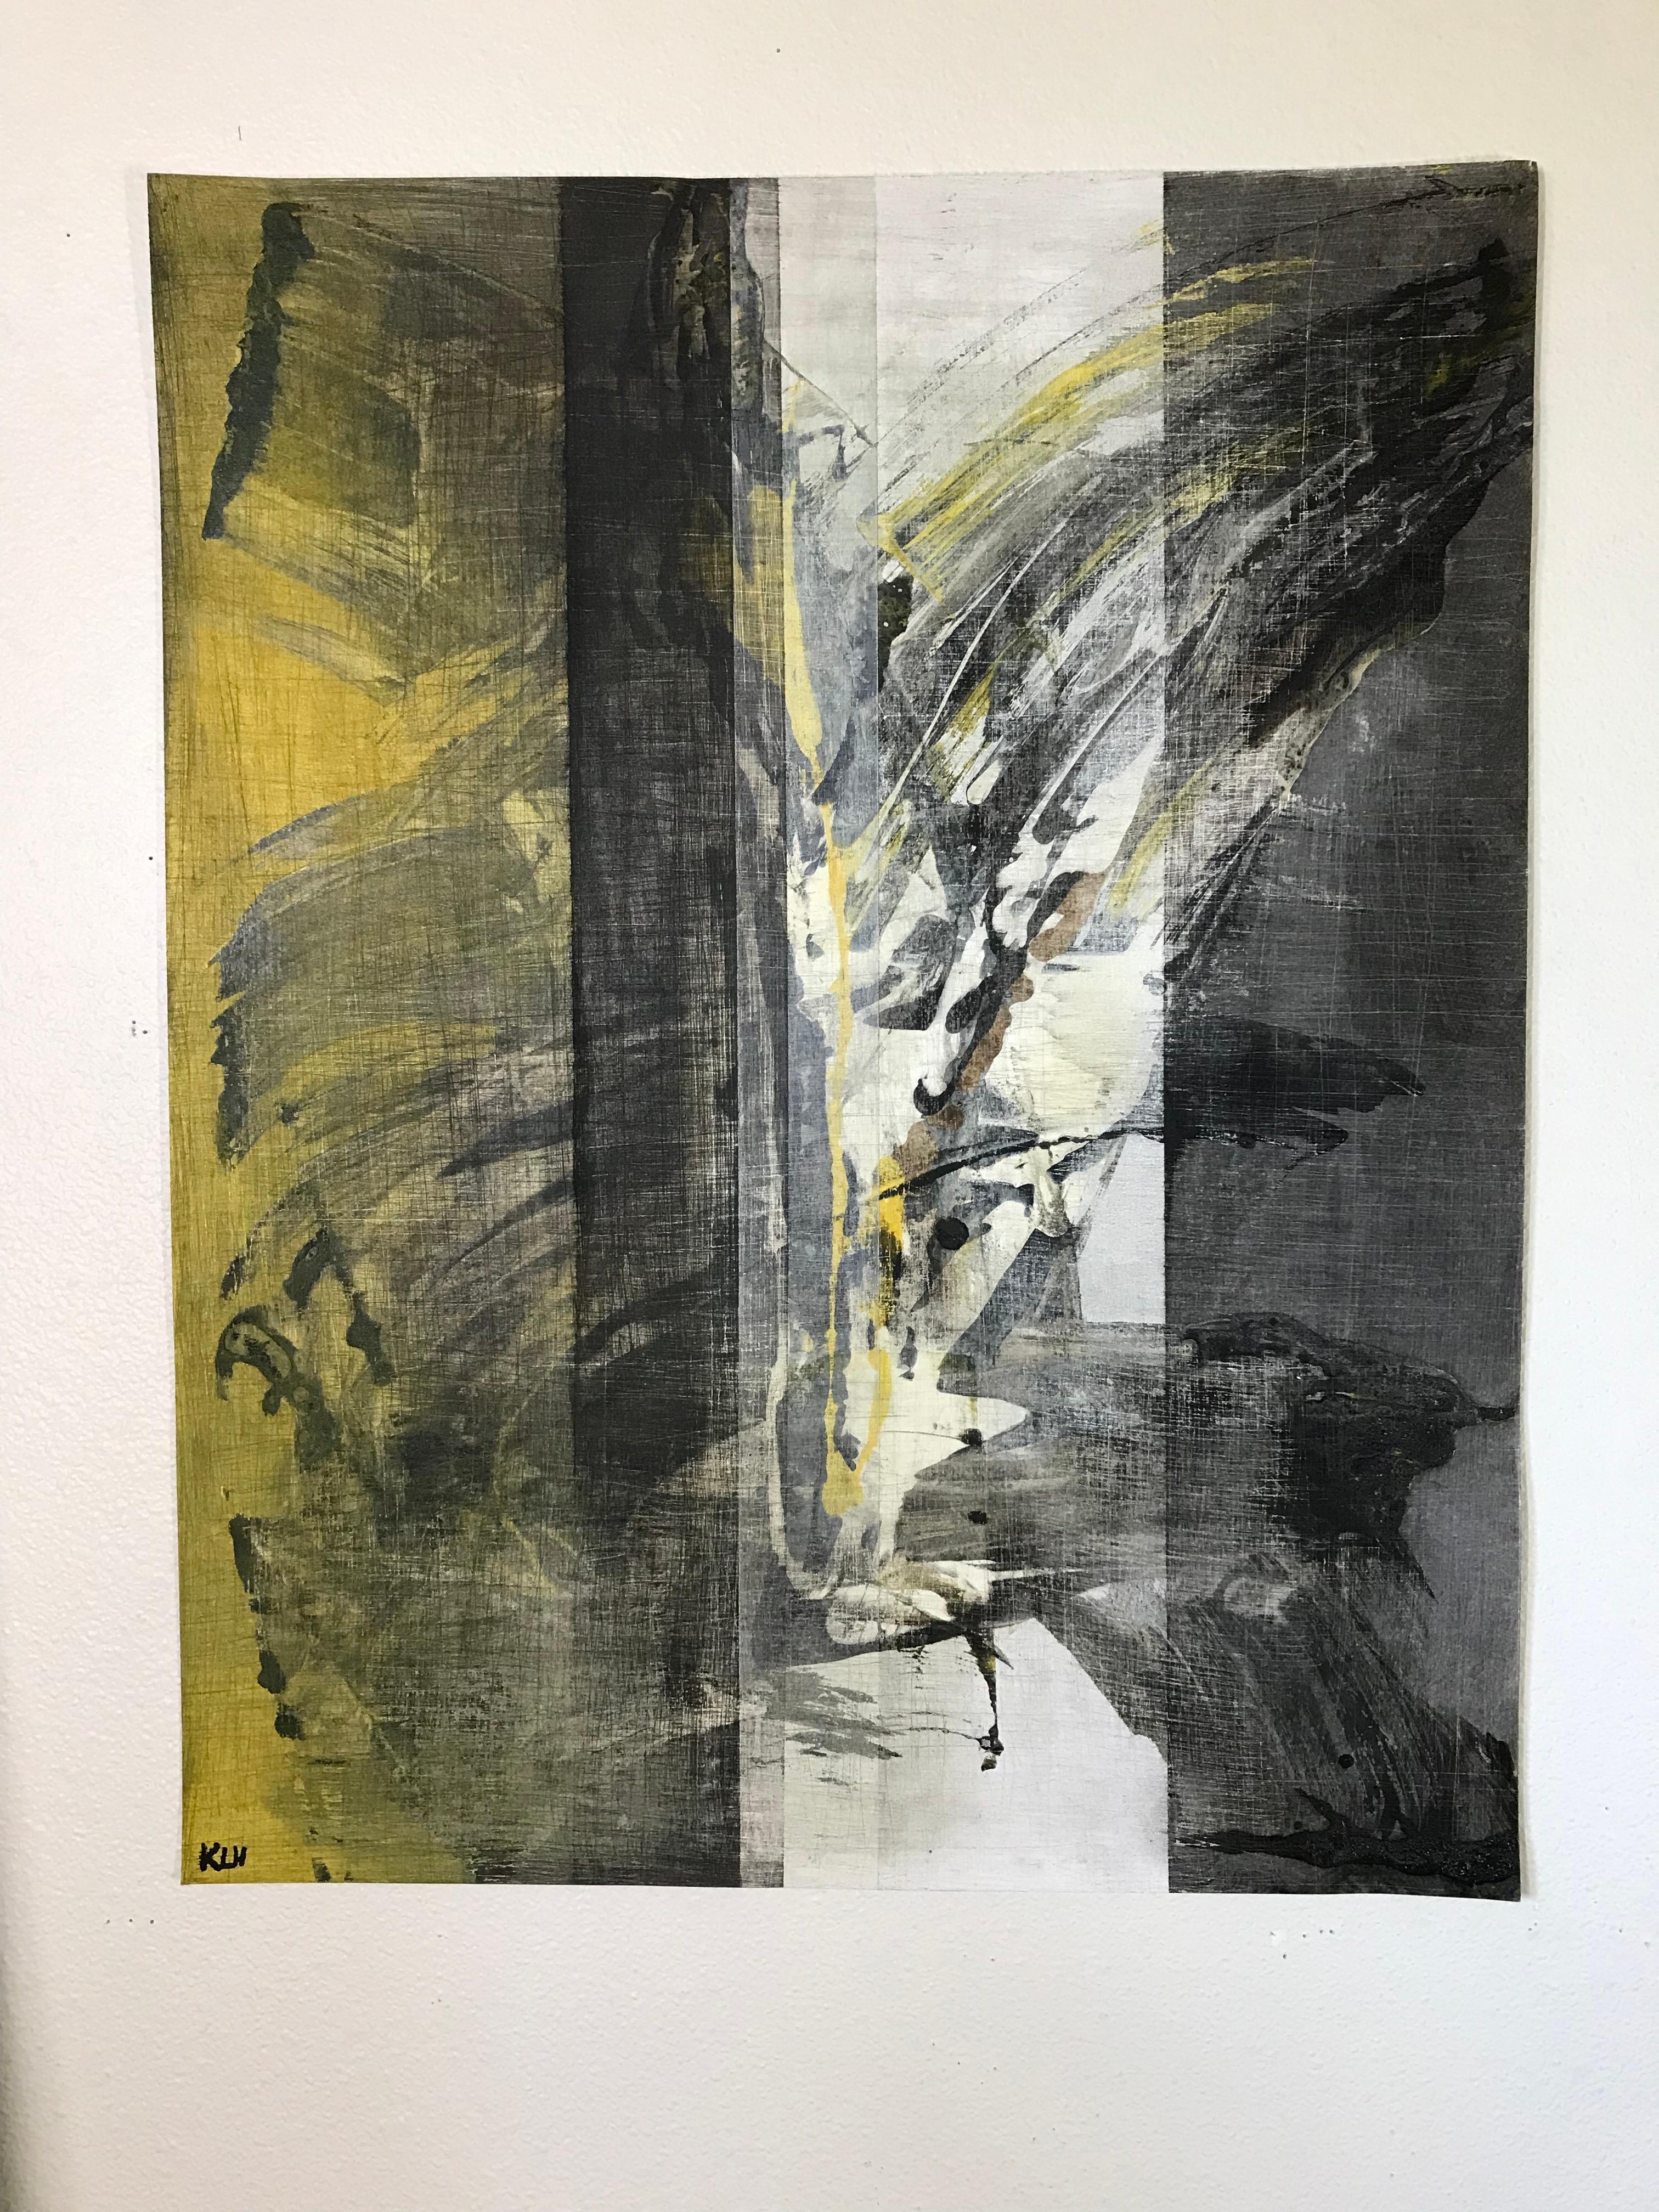 <p>Artist Comments<br>Artist Kris Haas depicts an abstract image with vertical see-through columns and vigorous strokes in black and yellow. The piece cuts in sections with an even pattern of marks and scratches appearing above. Part of Kris'